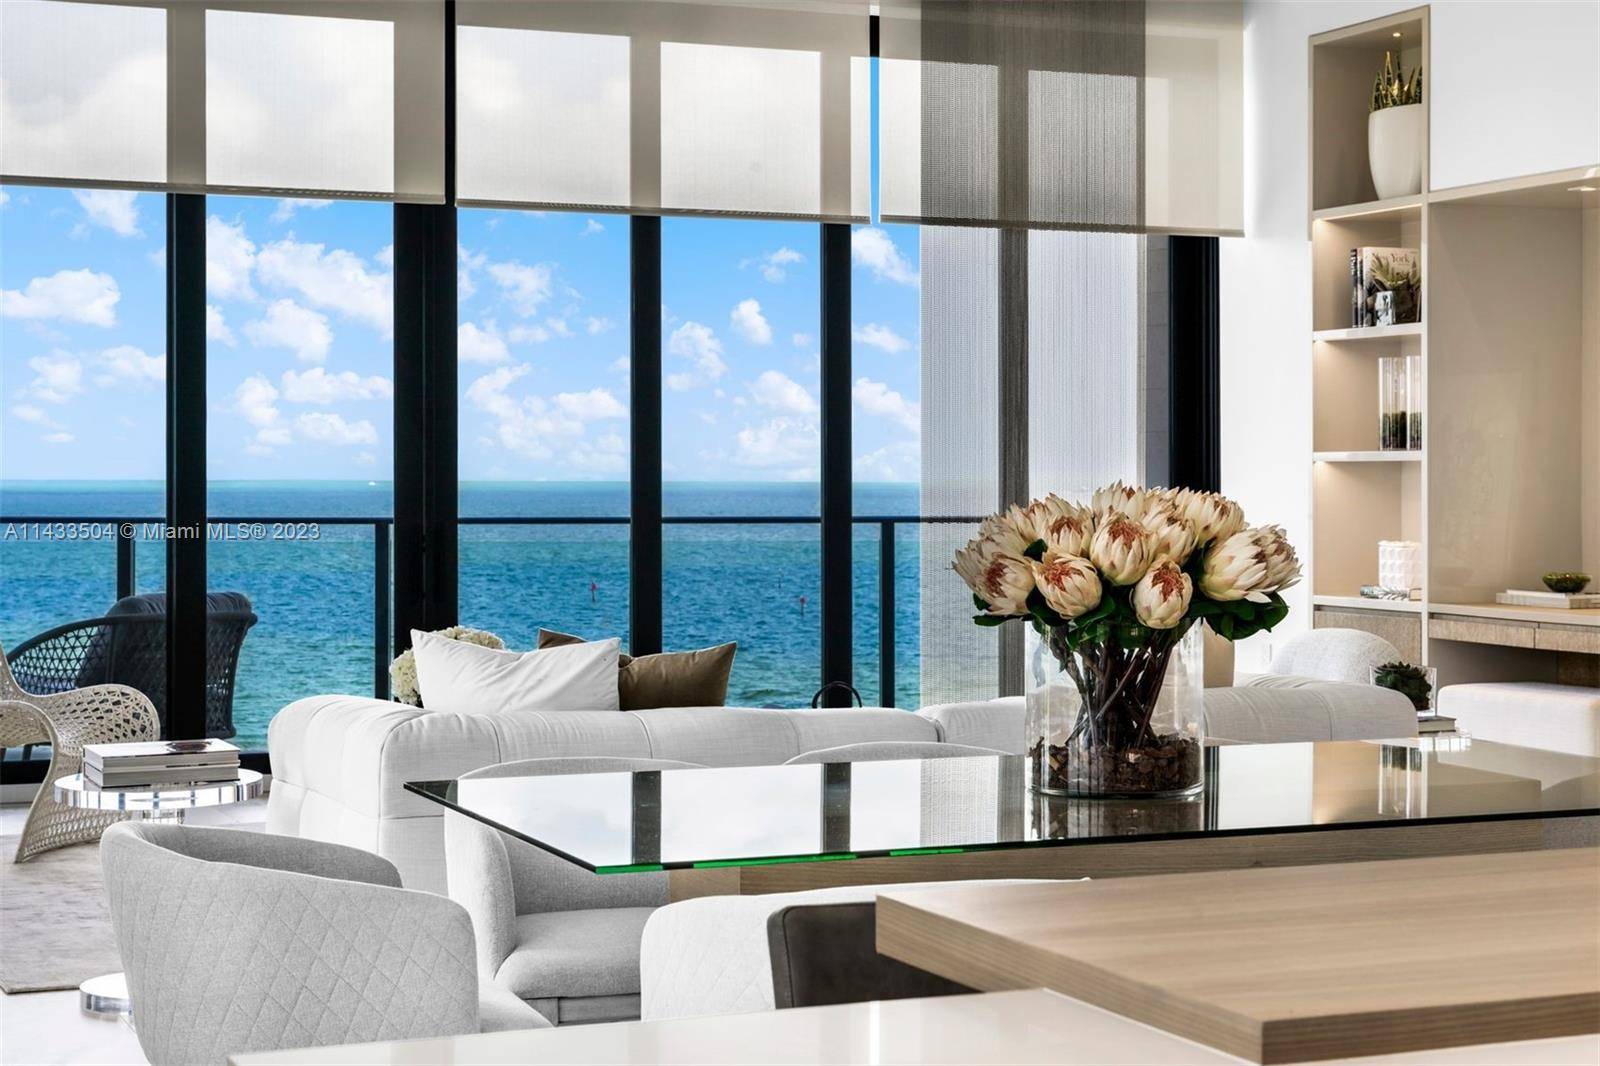 Available turnkey The Fairchild A Boutique Experience and Coconut Grove's most enticing bayfront complex.